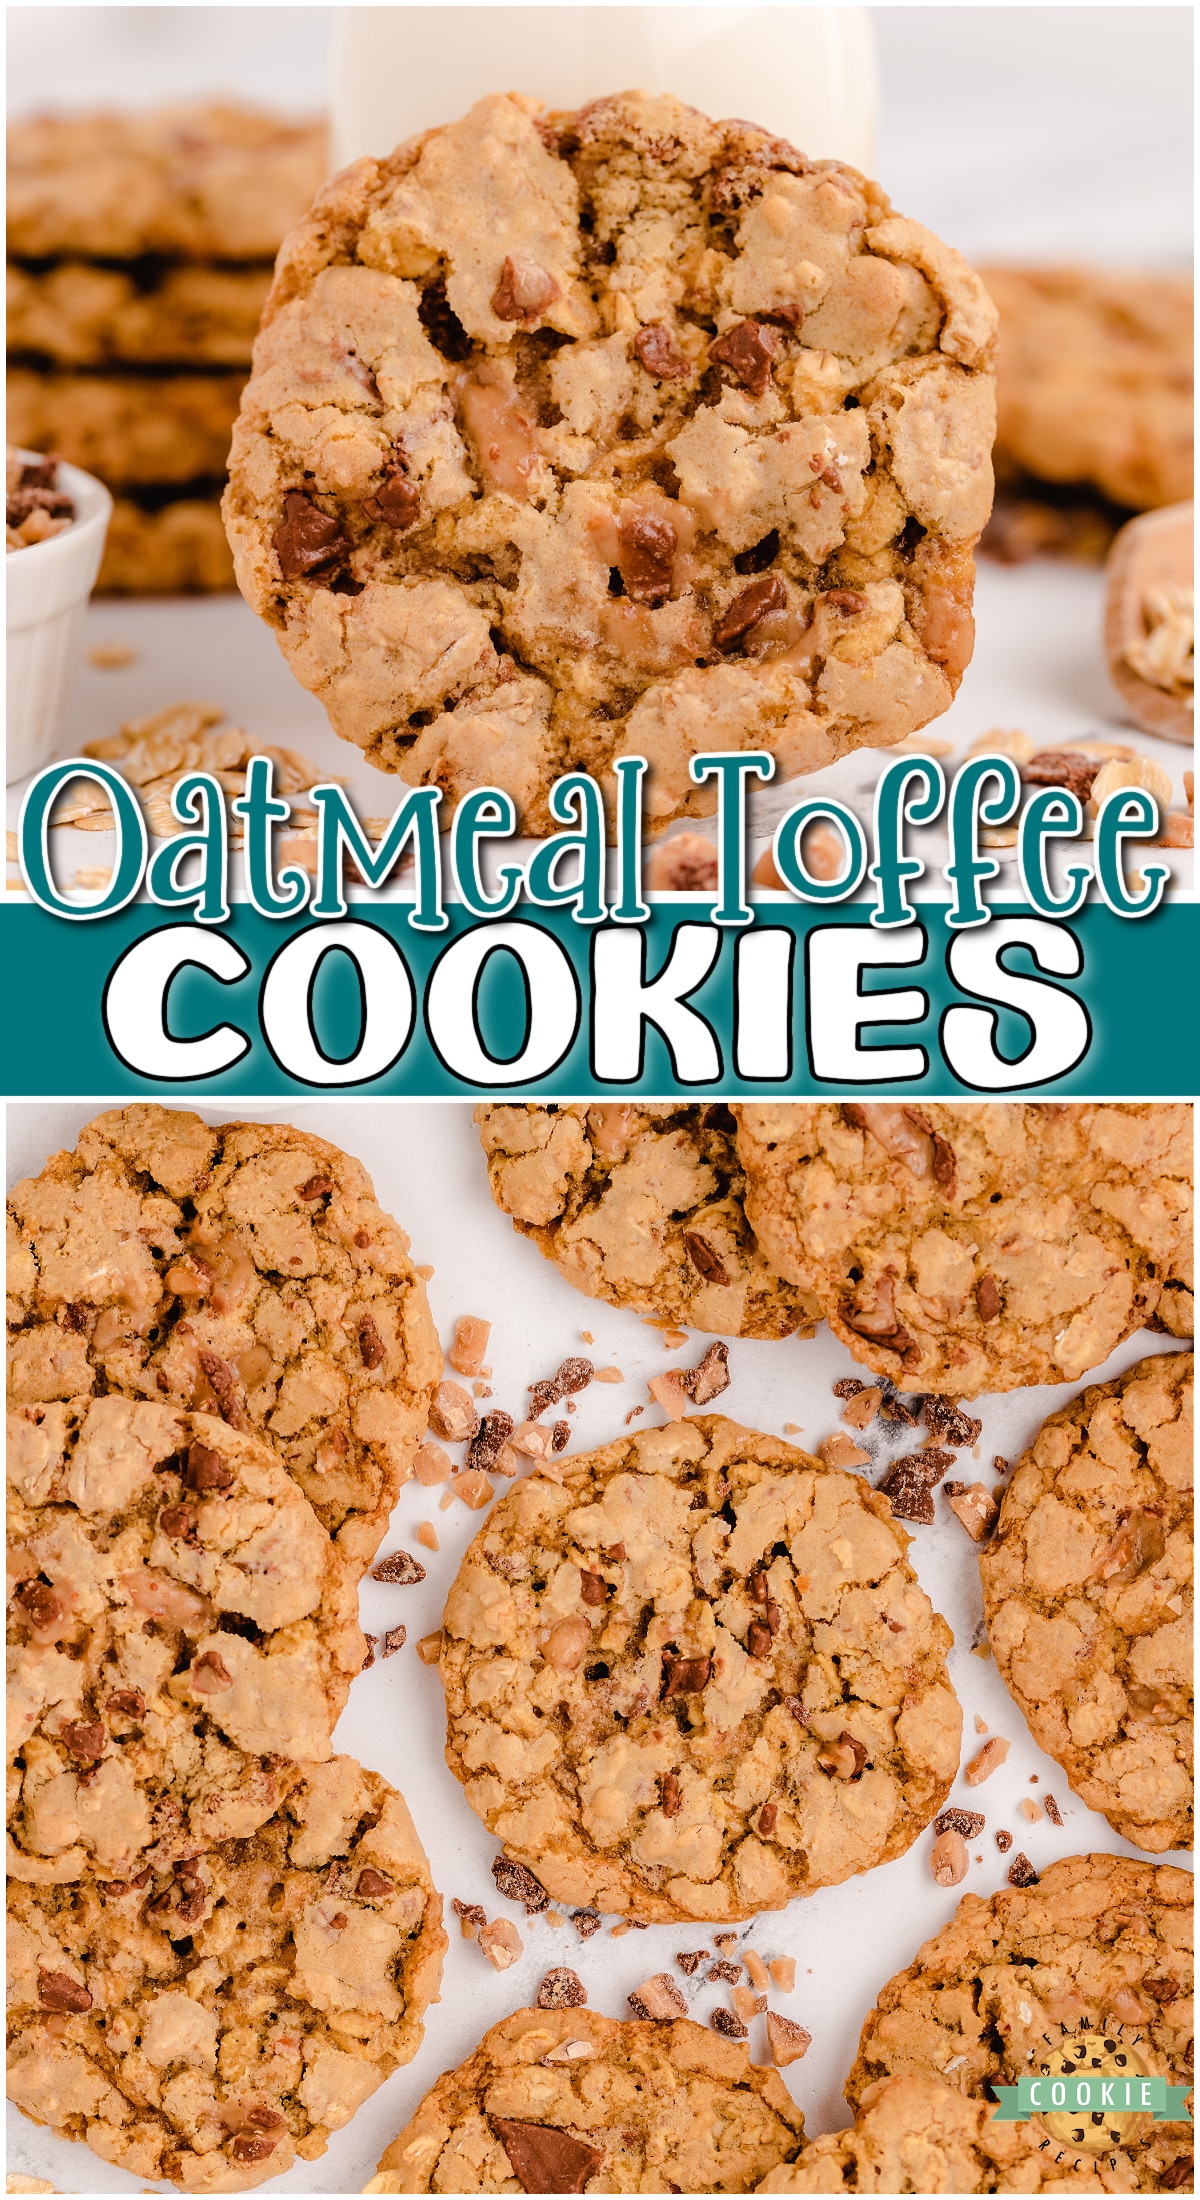 Toffee Oatmeal Cookies are a variation on a classic oatmeal cookie recipe, but with a toffee twist! The maple extract and crunchy buttery bits add delicious flavor to this amazing toffee cookie recipe.